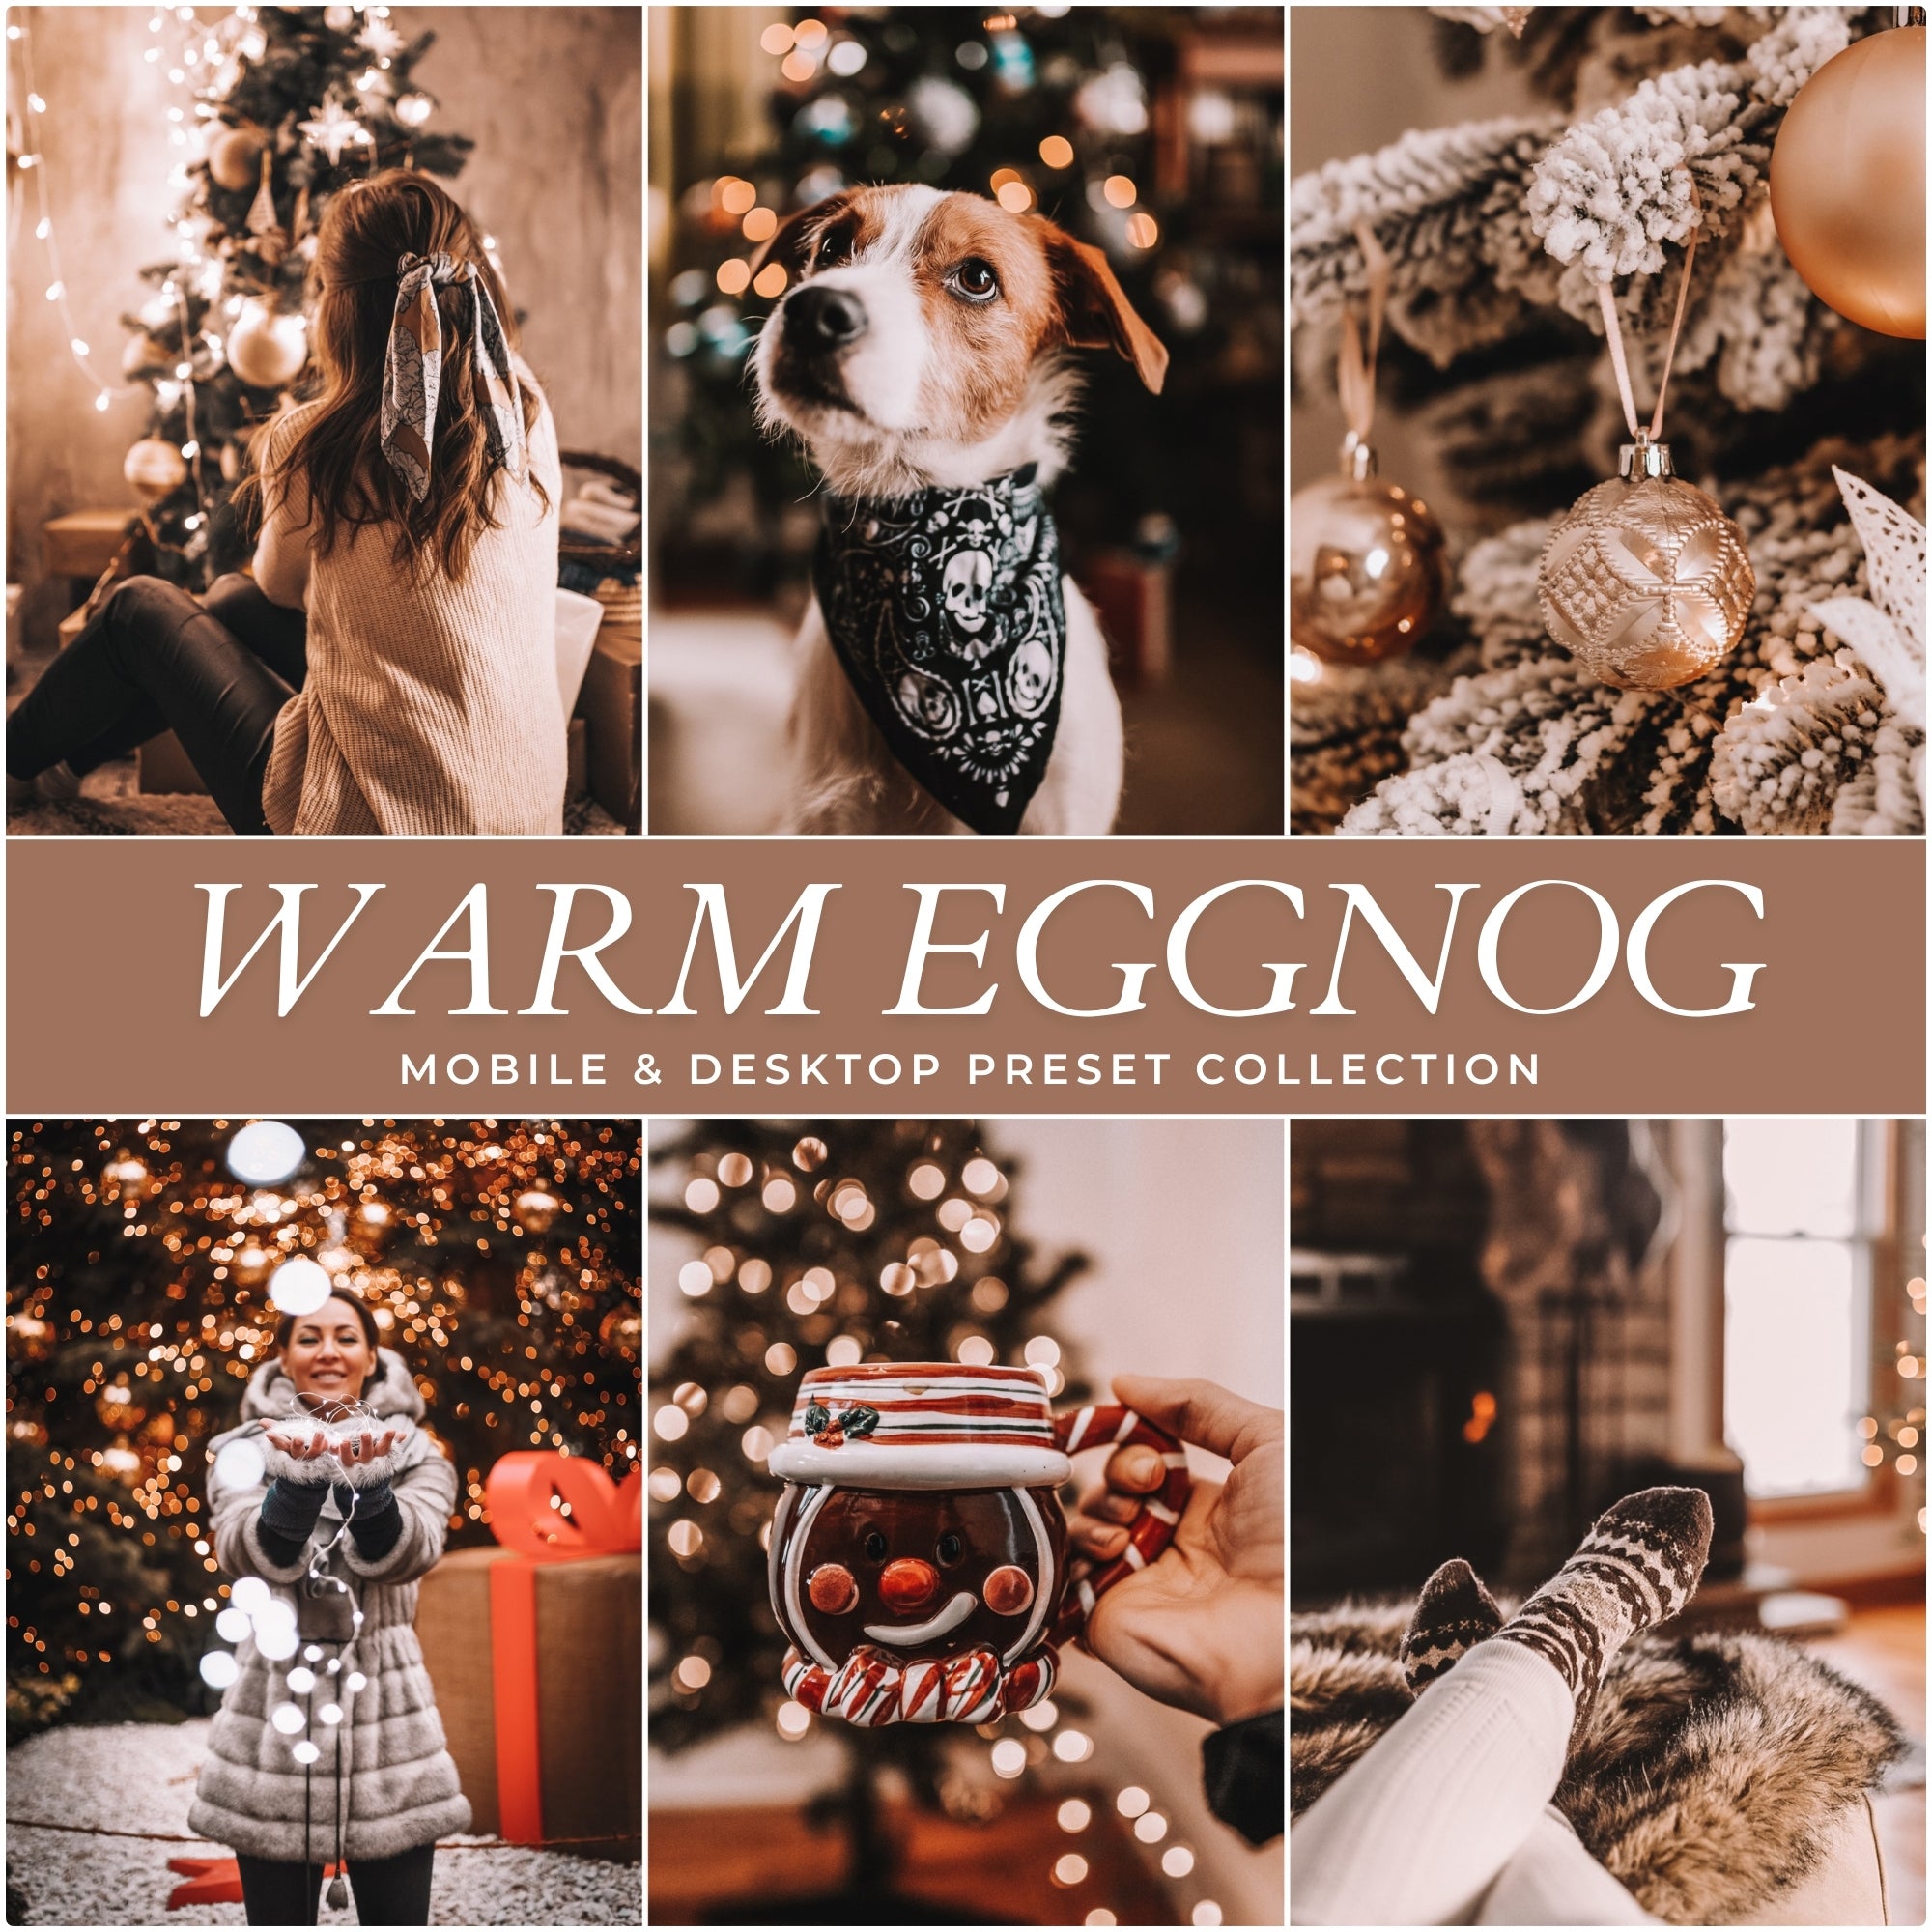 Top Rated Christmas Lightroom Presets The Best Photo Editing Preset Filters For Christmas And Winter Holiday Photos with Adobe Lightroom Mobile And Desktop For Photographers and Instagram Influencers By Lou And Marks Presets